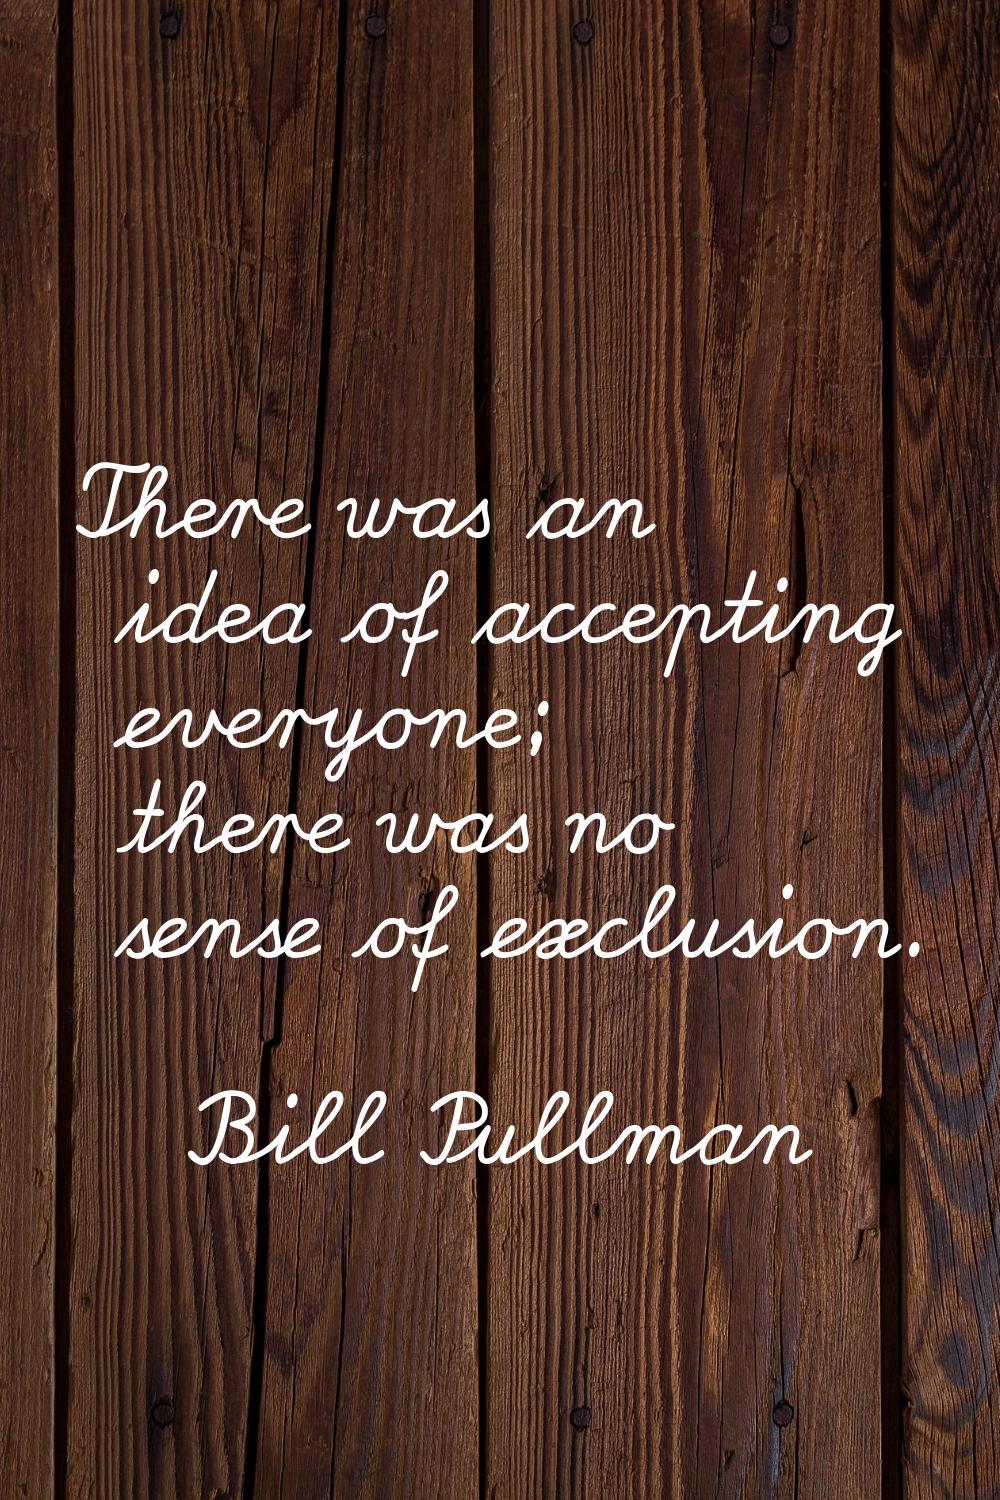 There was an idea of accepting everyone; there was no sense of exclusion.